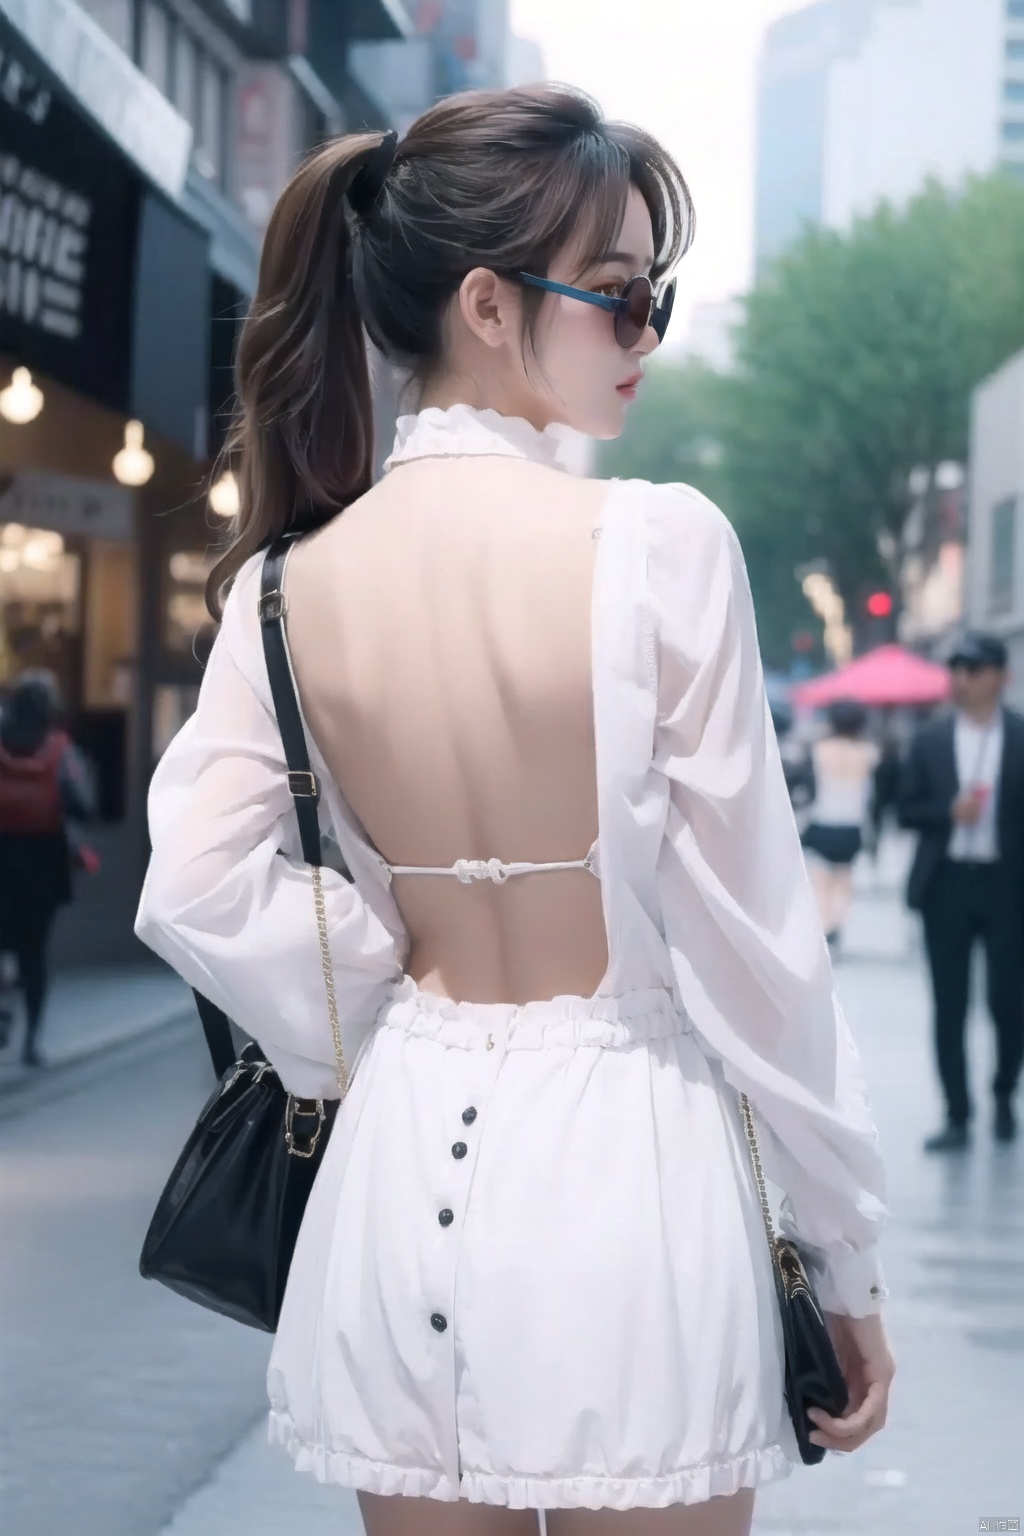 backless outfit,monocular glasses,